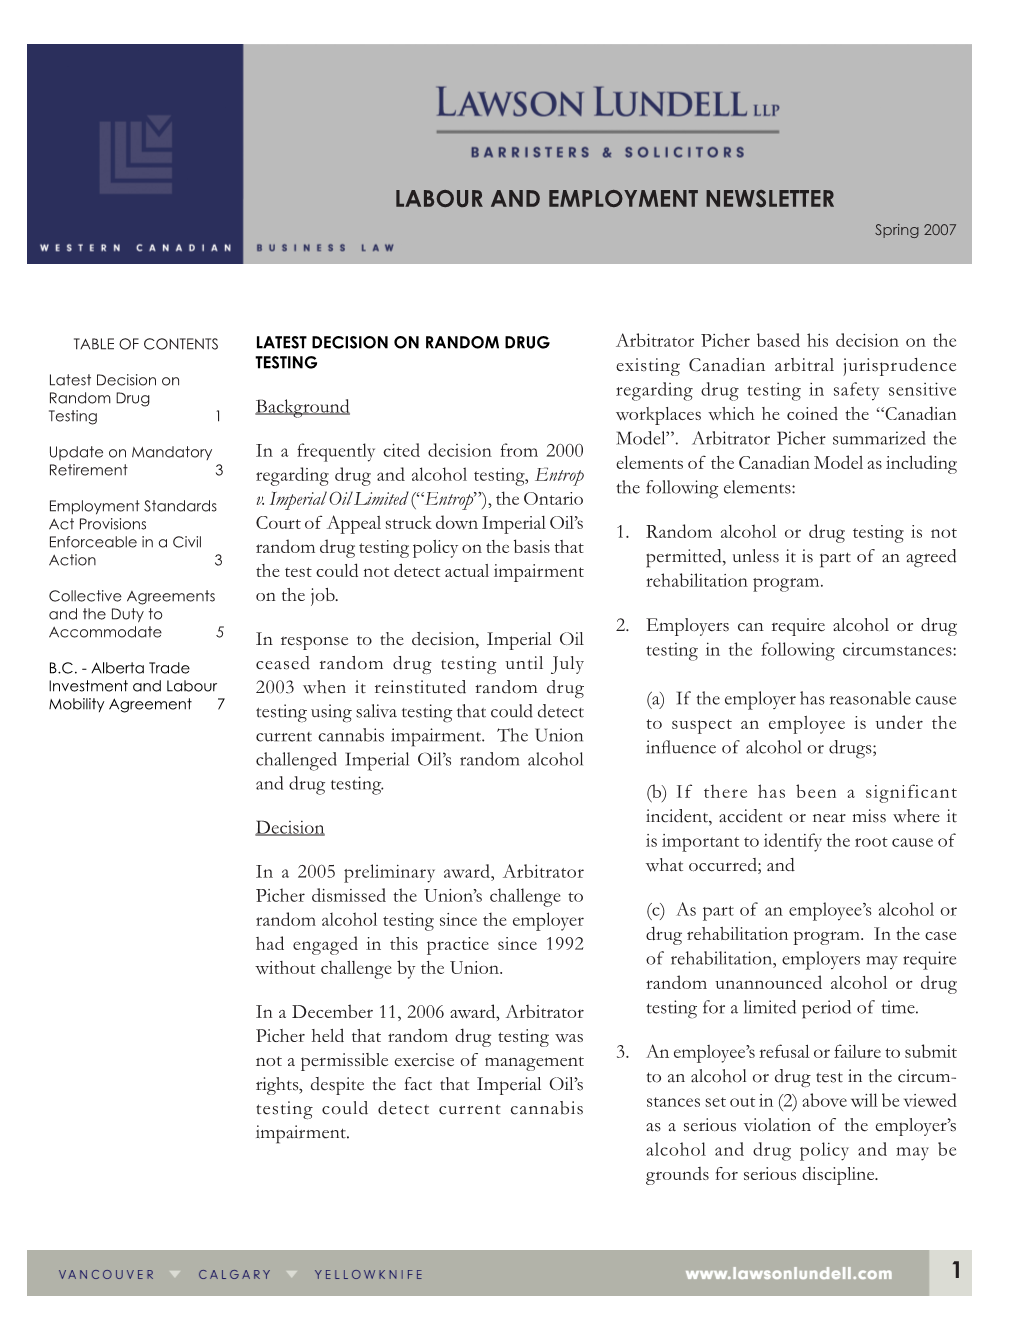 LABOUR and EMPLOYMENT NEWSLETTER Spring 2007